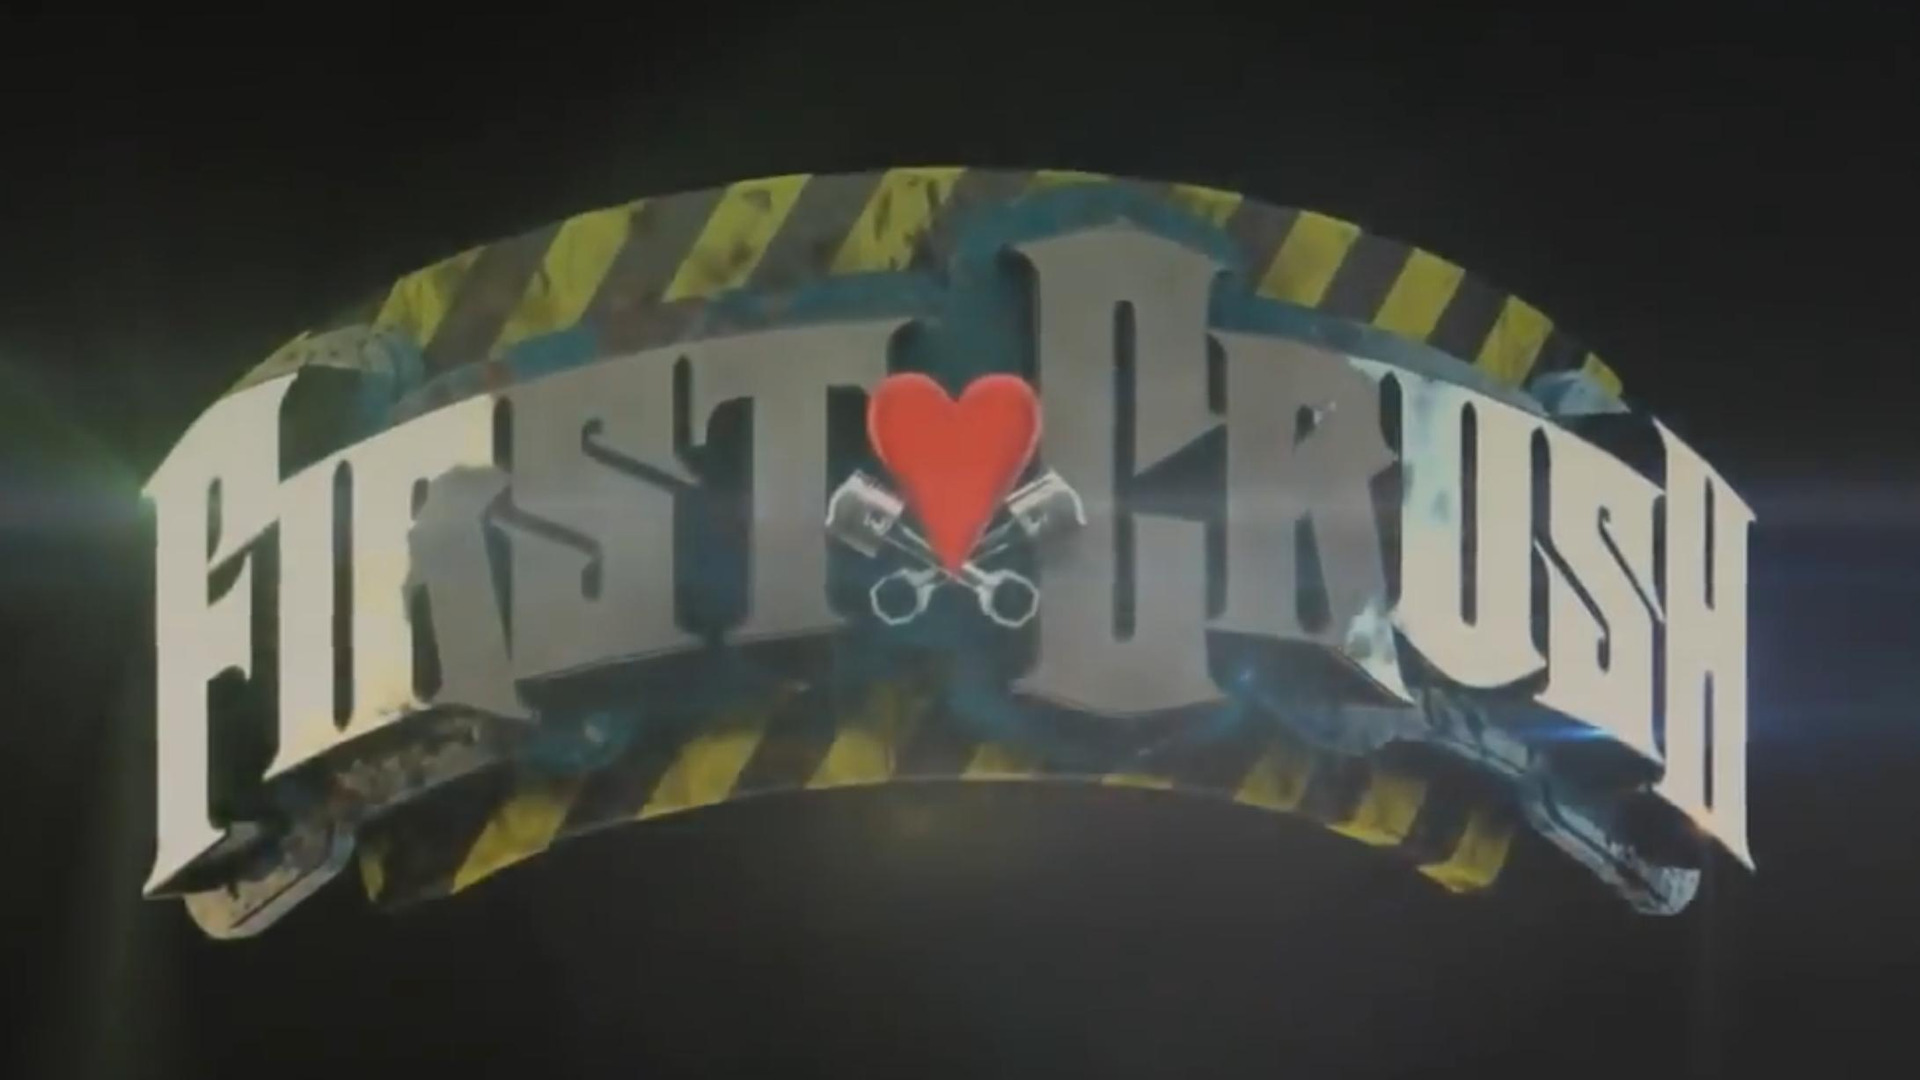 Show First Crush